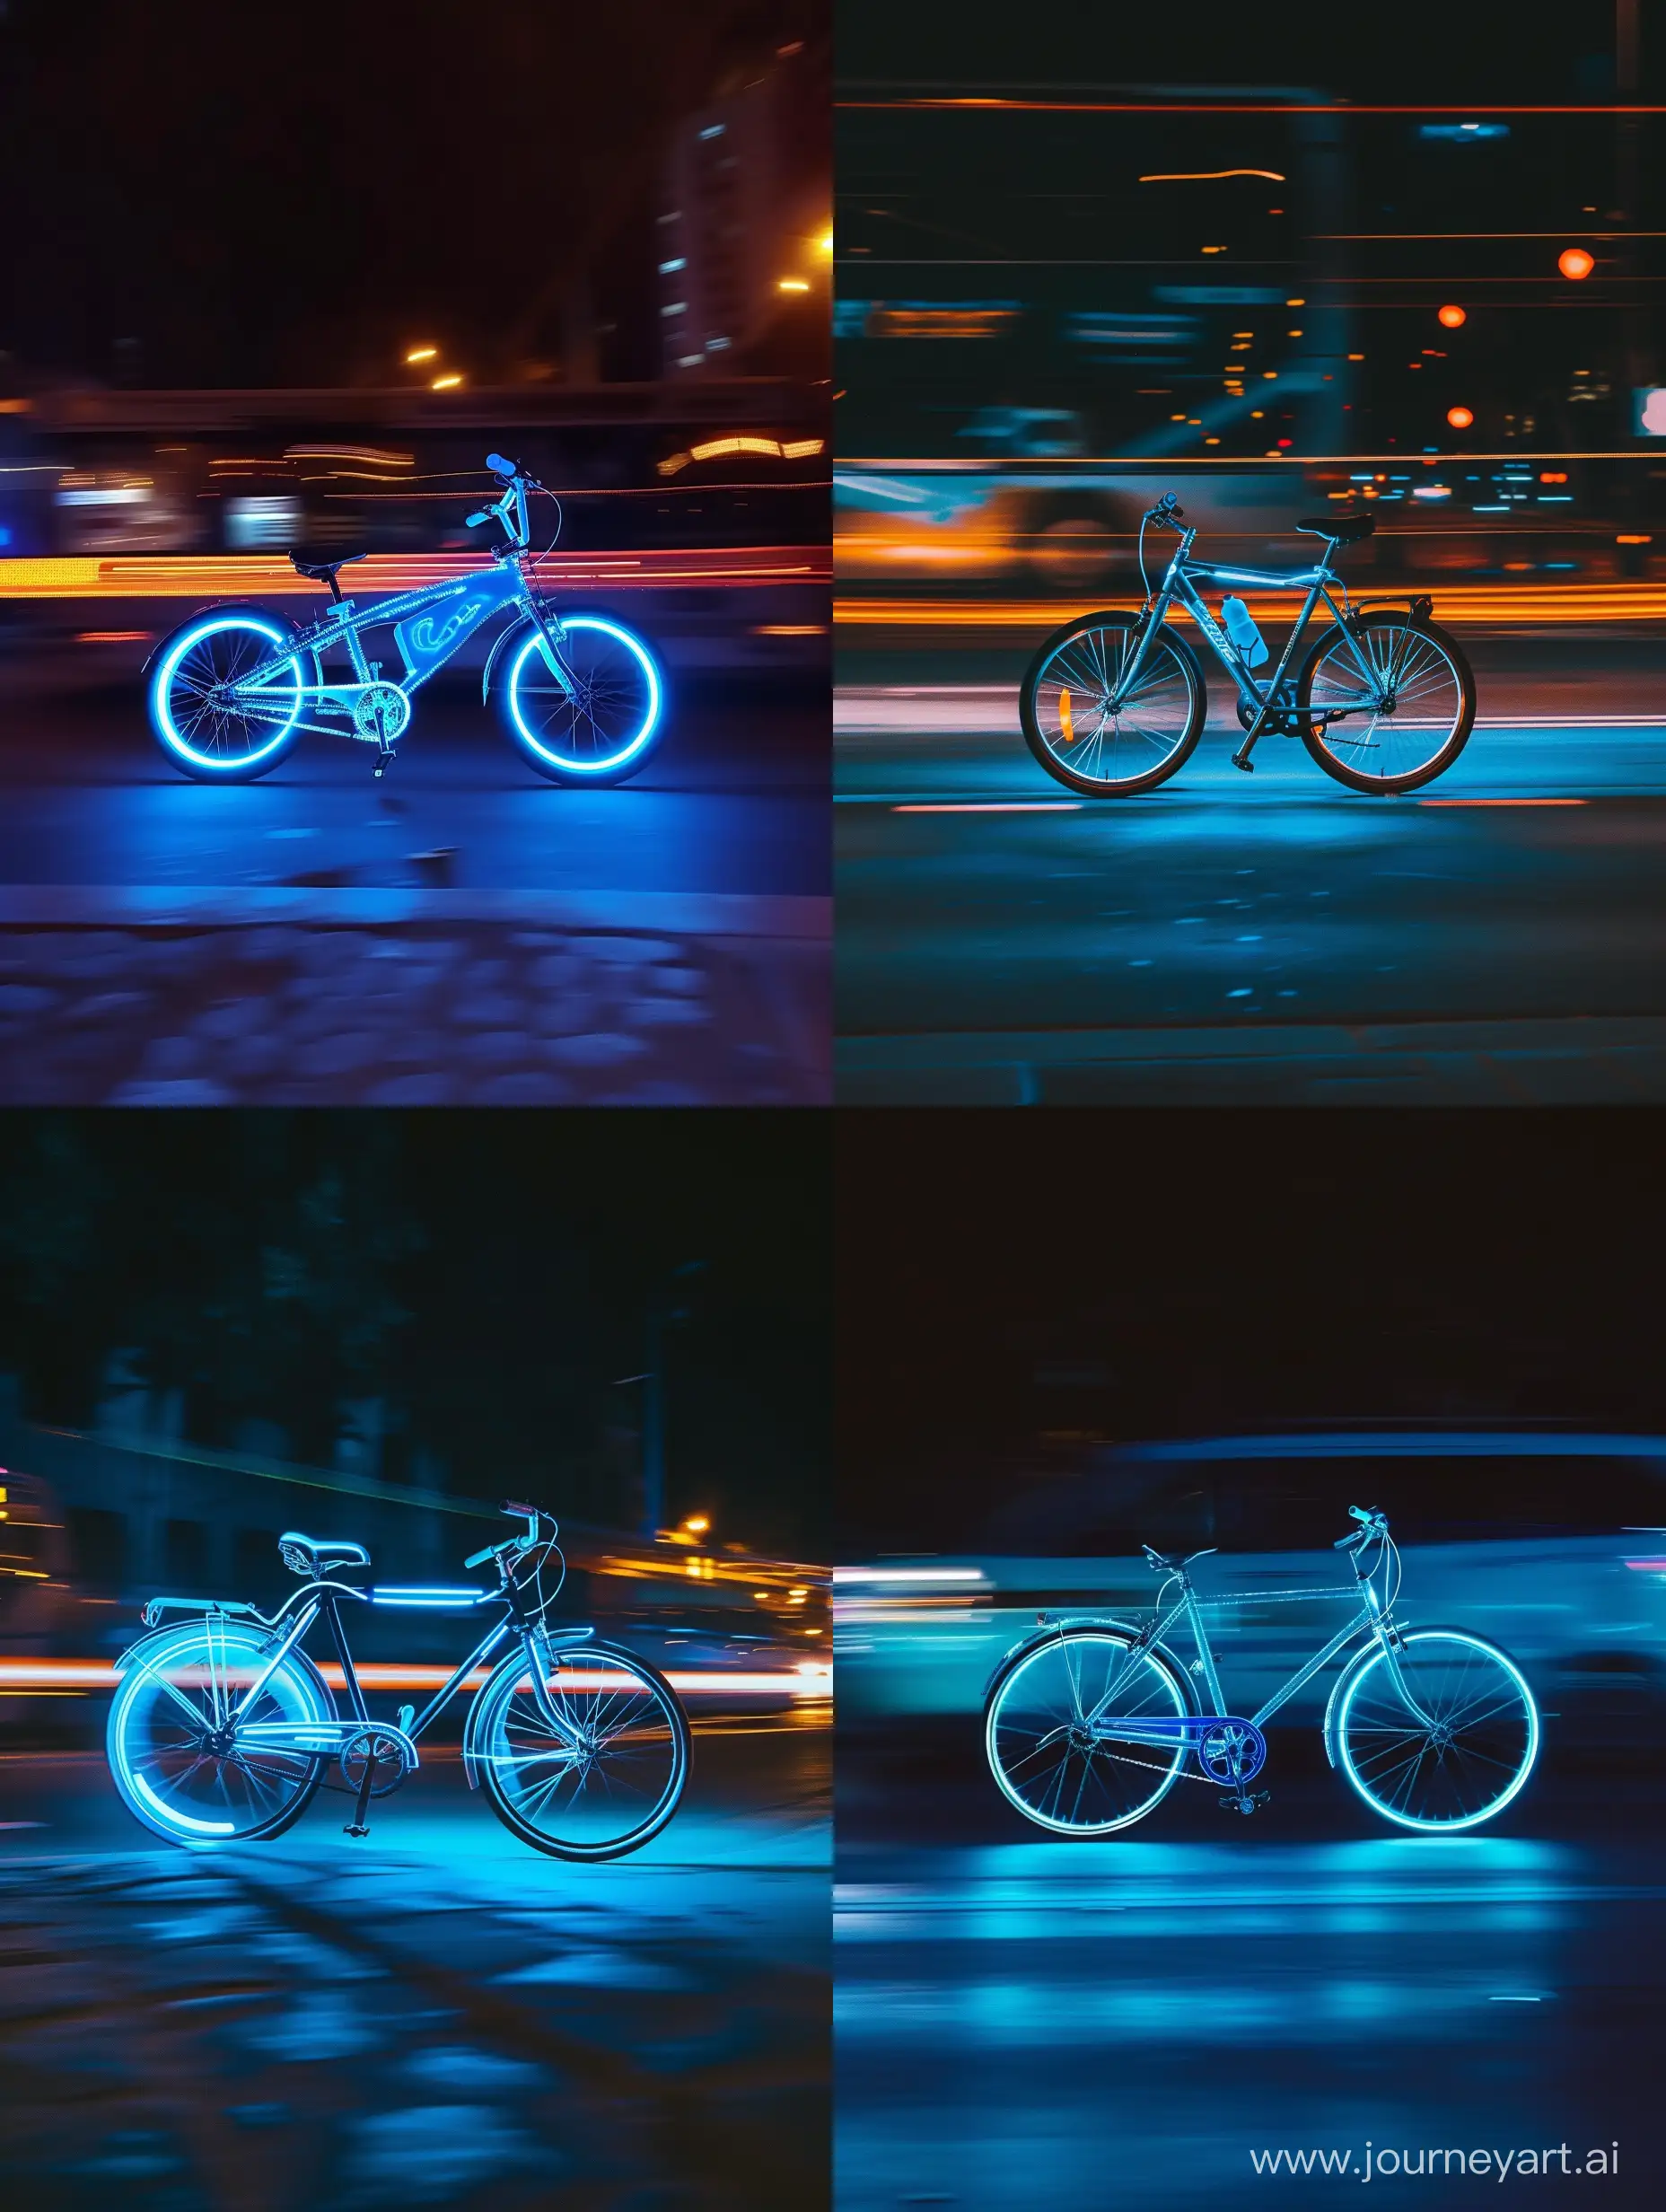 Nighttime-Product-Photography-Glowing-Blue-Bicycle-Passing-By